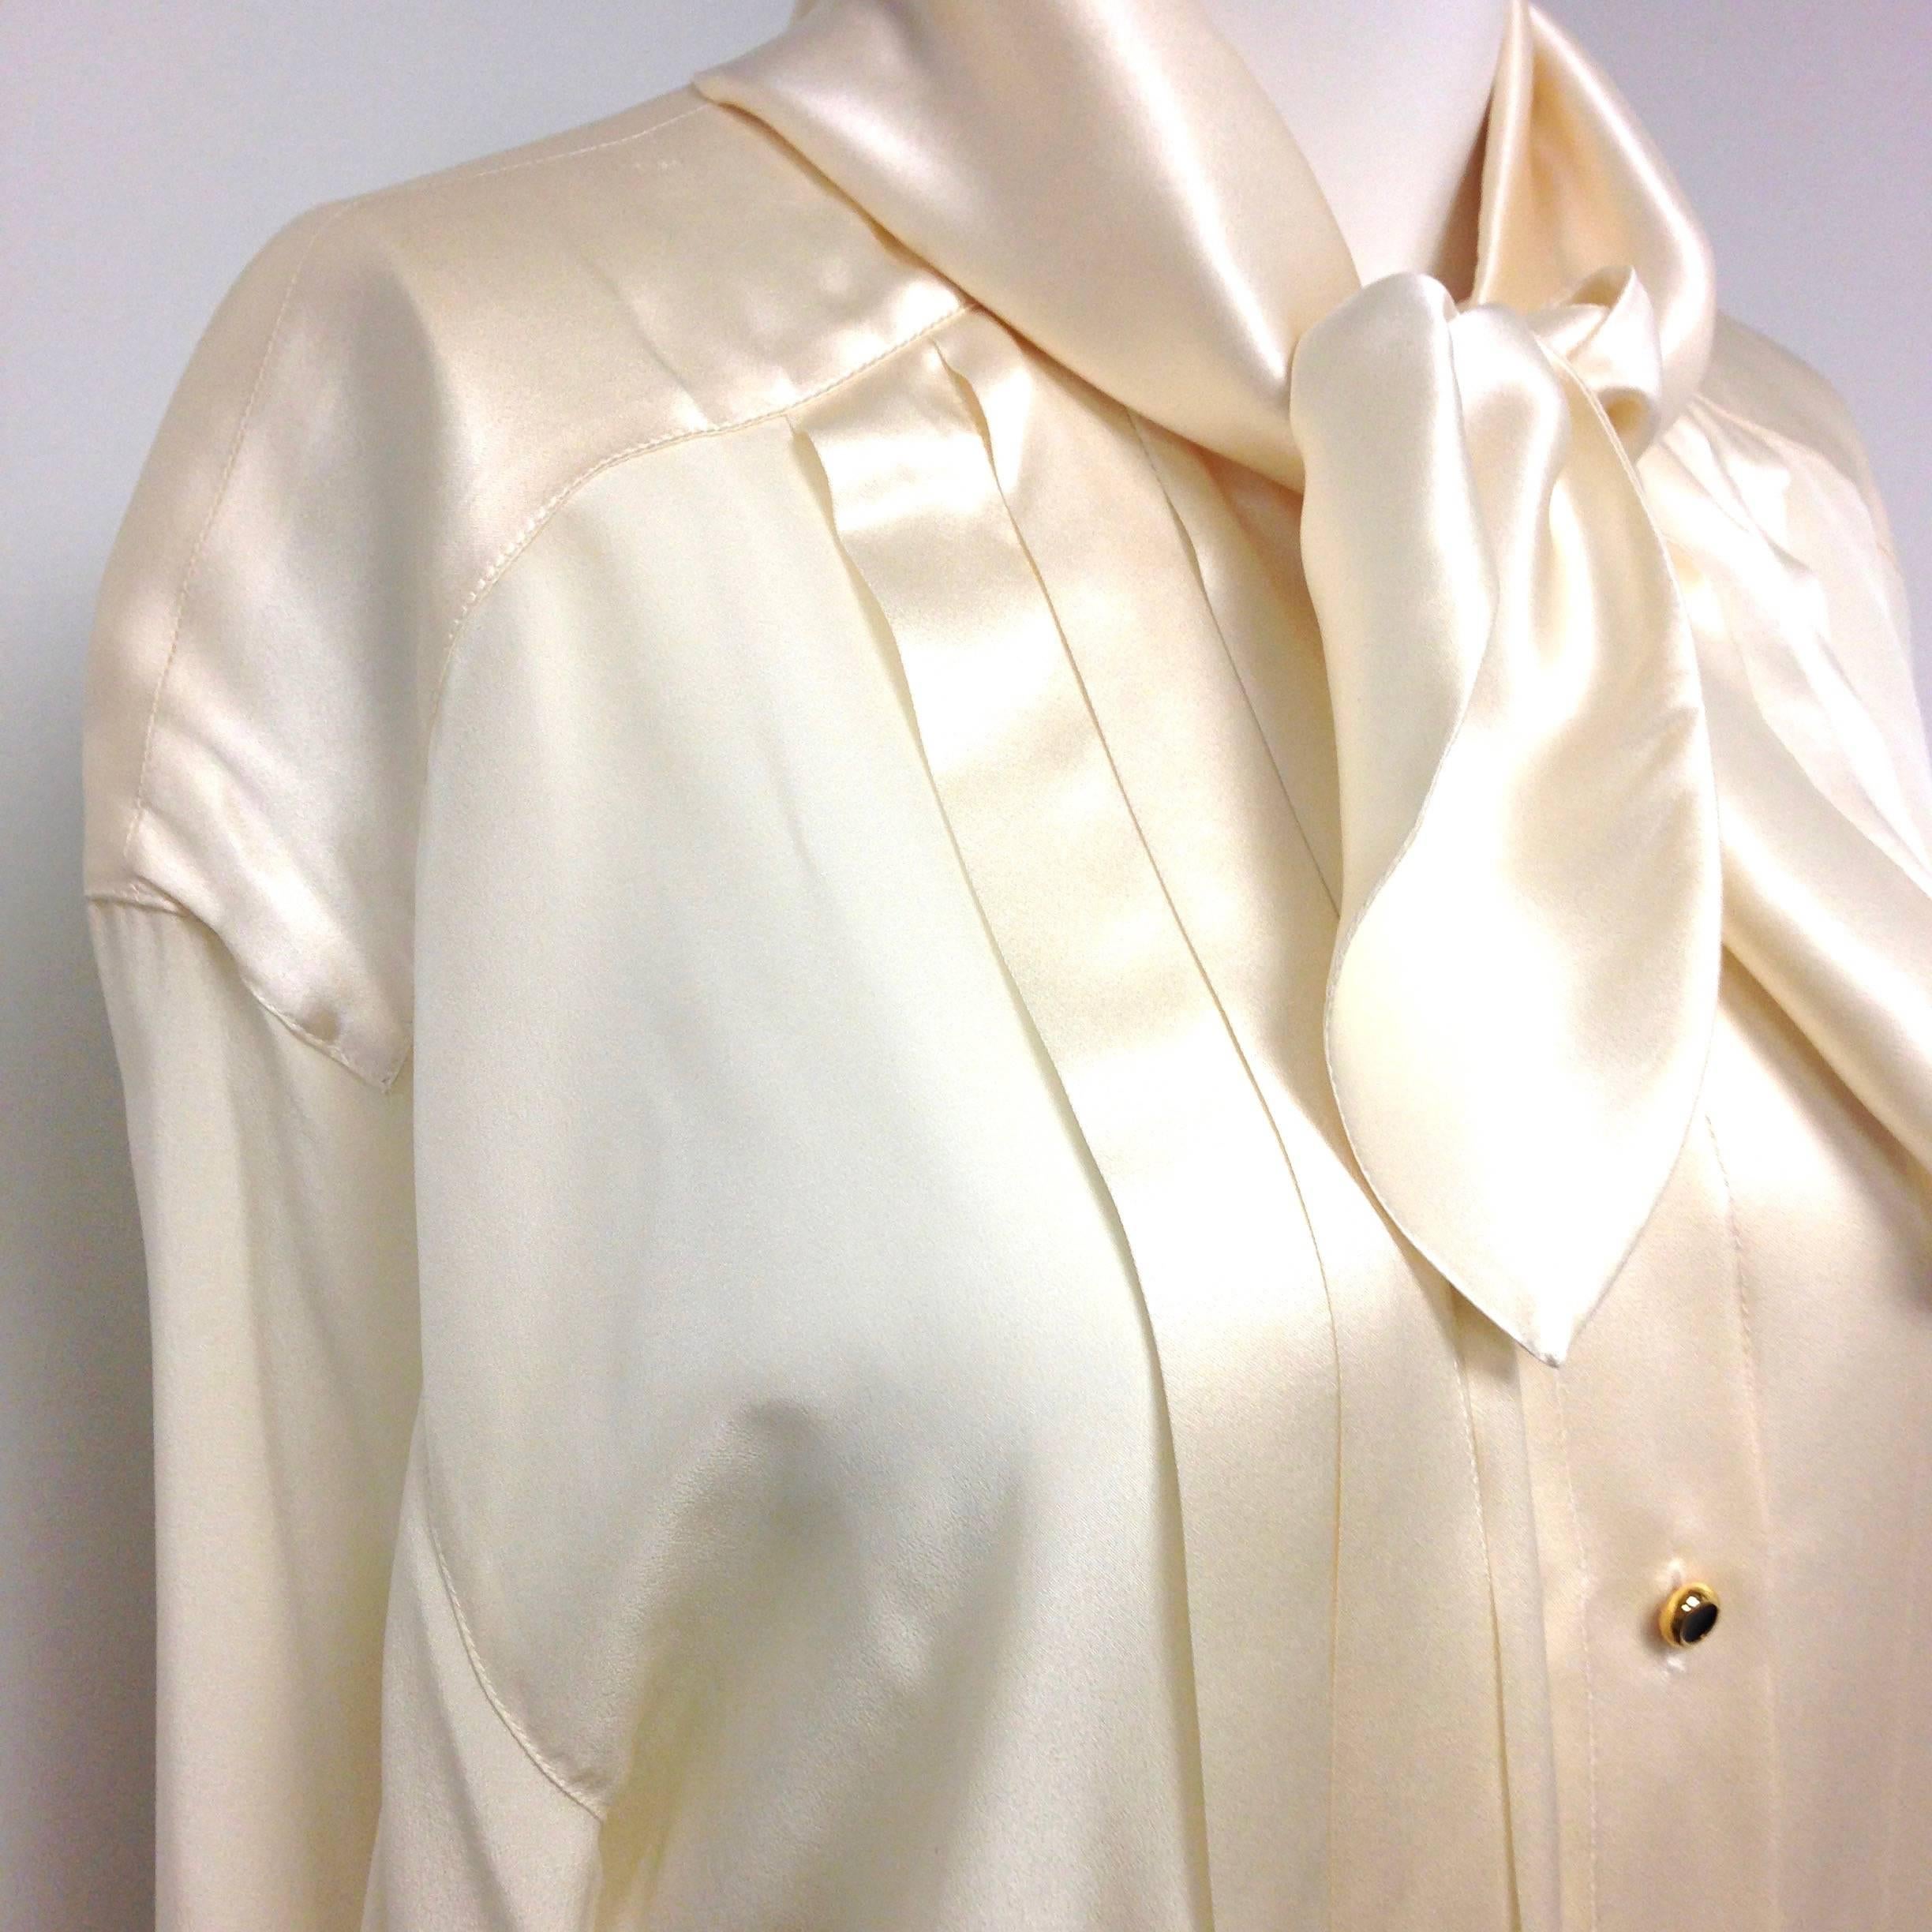 Classy vintage Escada silk blouse by Margaretha Ley. Pleated front, scarf collar, line of buttons and bishop sleeves. Beautiful and elegand cream color. Made in Italy. Period: 1980s  Material: Silk  Condition: Excellent  Size: 42  
Measurements